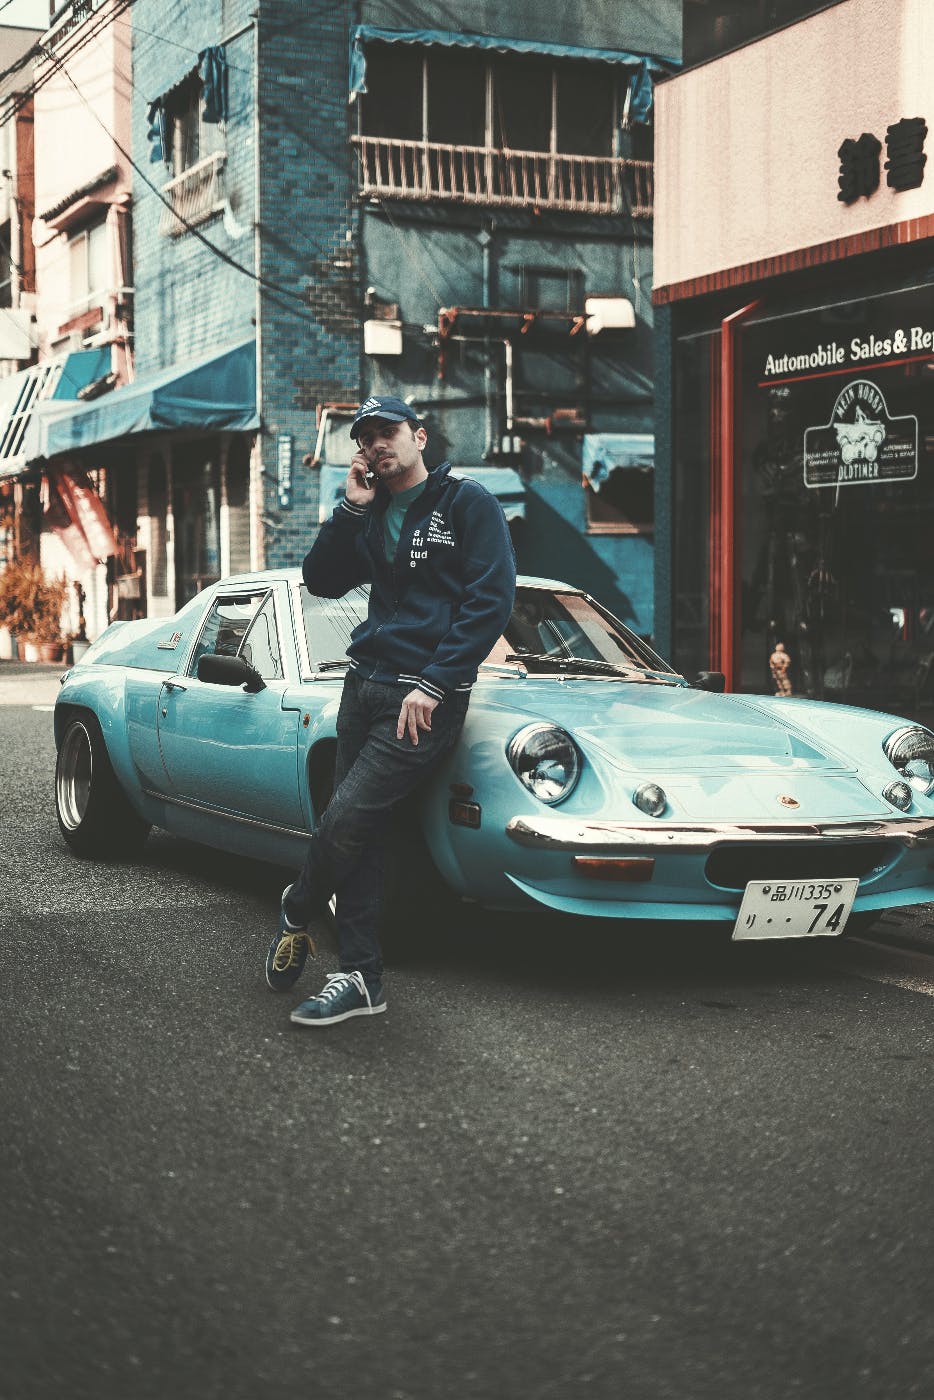 A guy leaning against a beat up blue sports car, talking on his smartphone